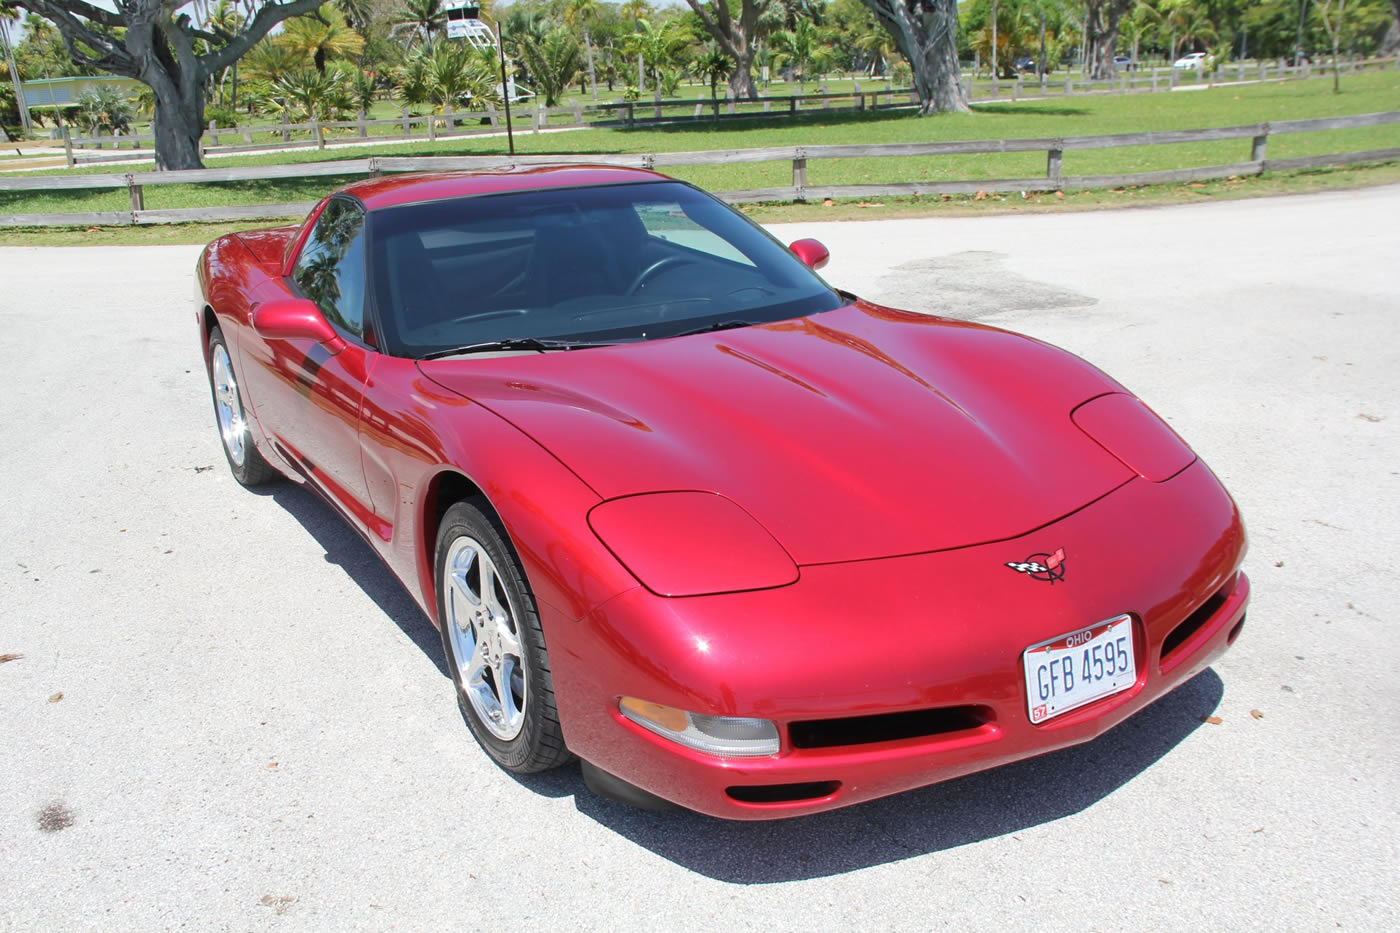 2004 Corvette Coupe in Magnetic Red Metallic